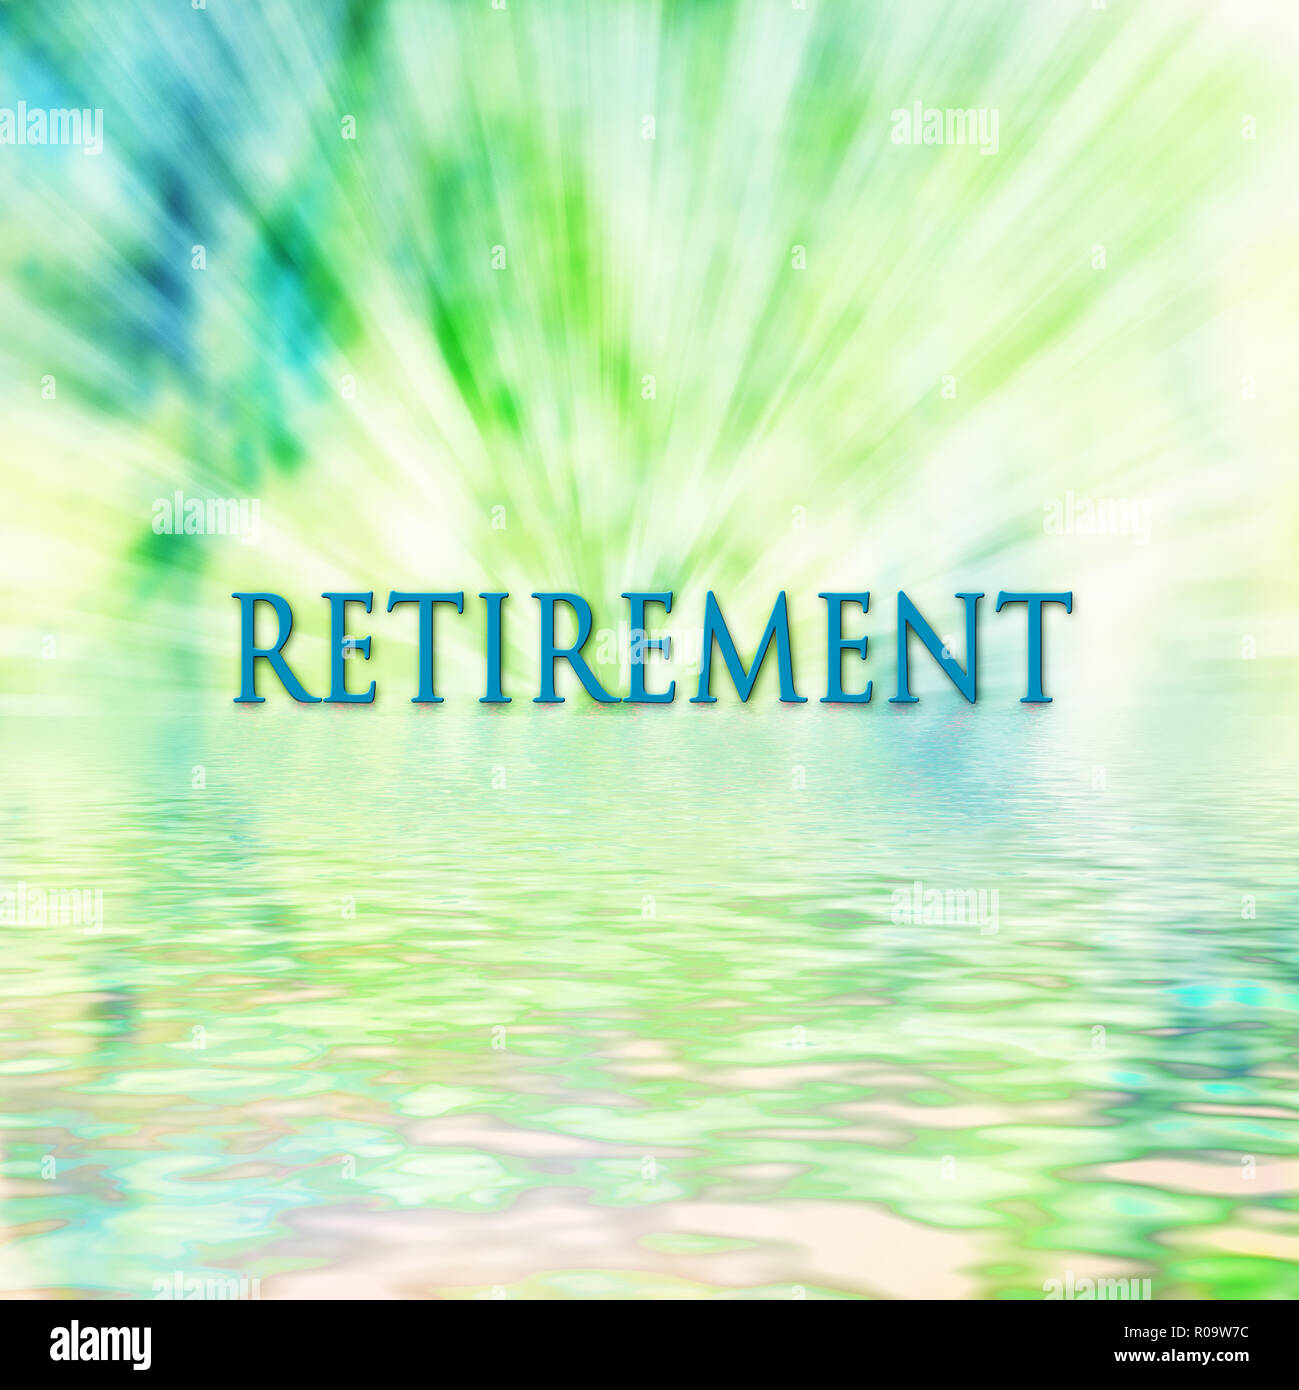 Retirement Background Graphic Illustration With Abstract Rays Of